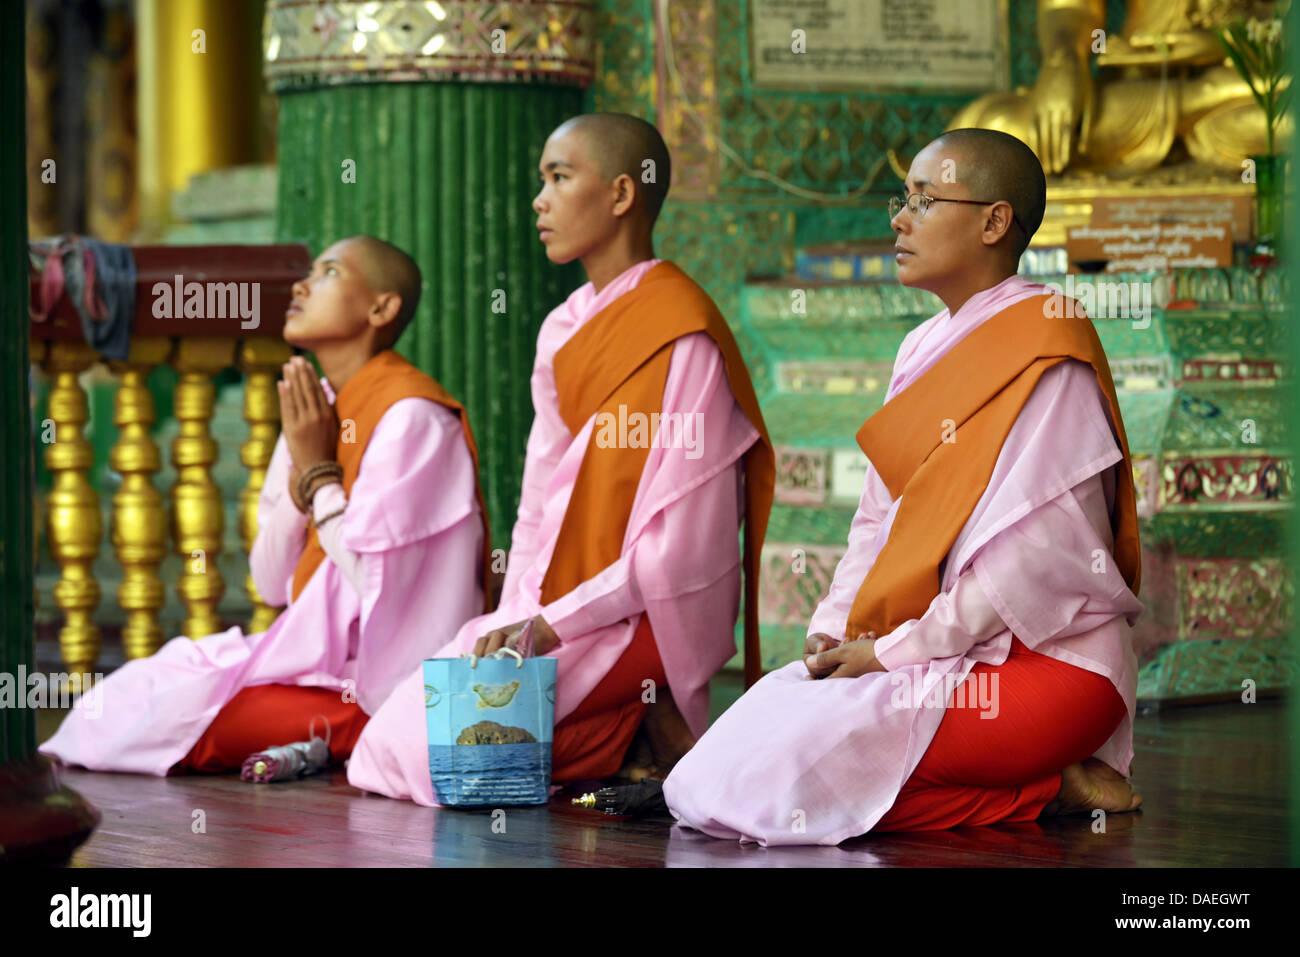 three Buddhistic nuns sitting praying at the Shwedagon Pagoda, the most important sacral building and religious centre of the country, Burma, Yangon Stock Photo